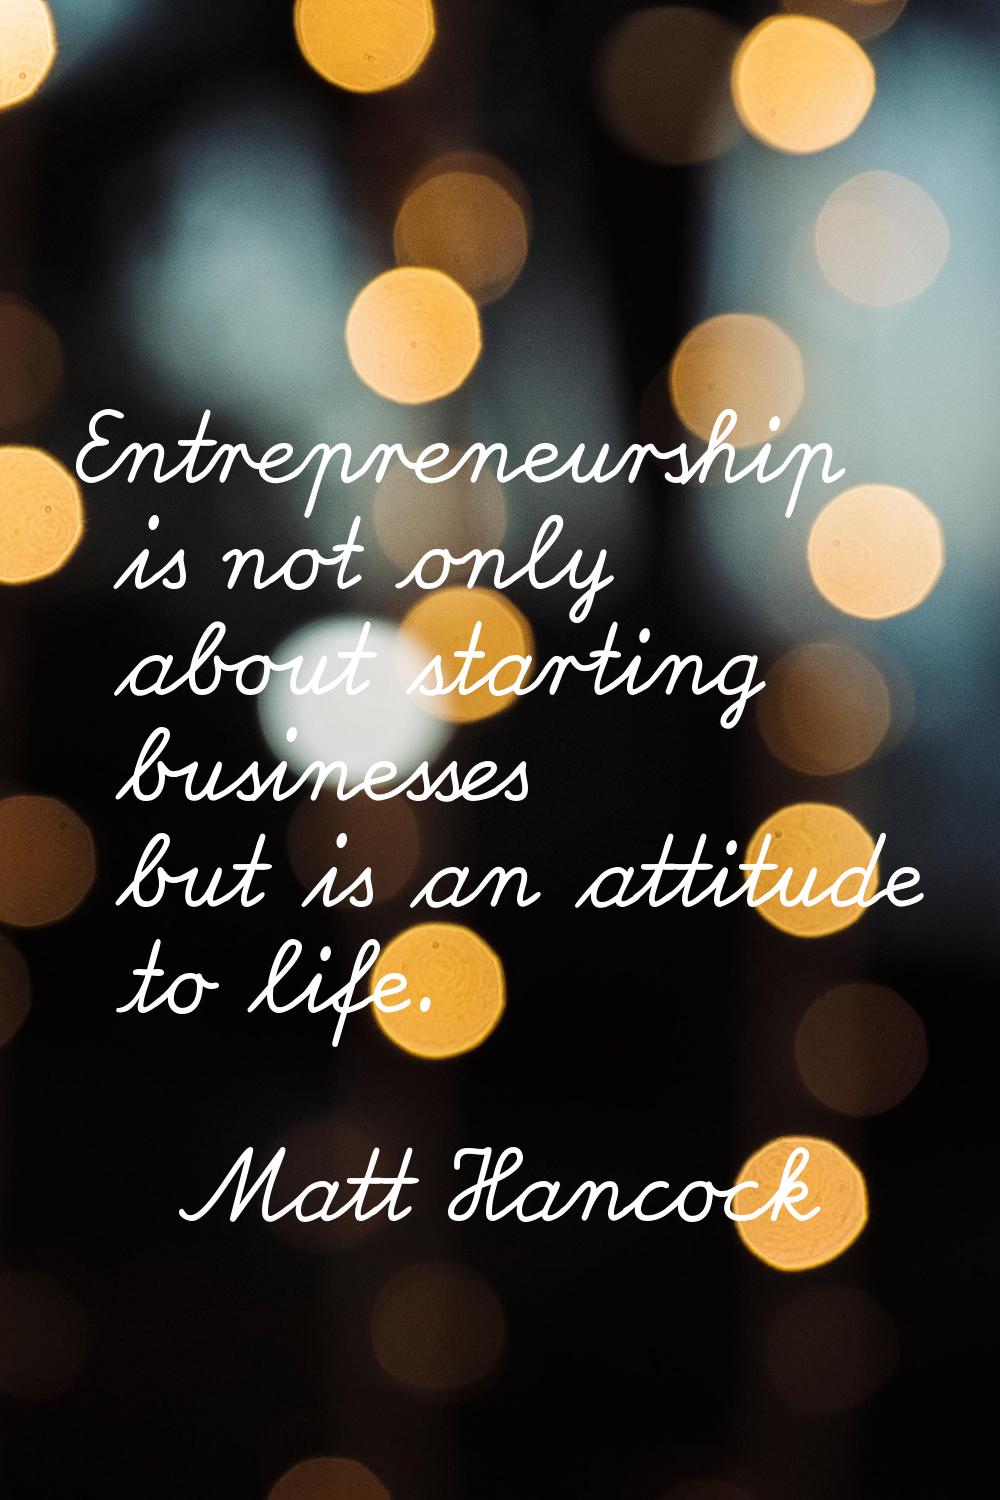 Entrepreneurship is not only about starting businesses but is an attitude to life.